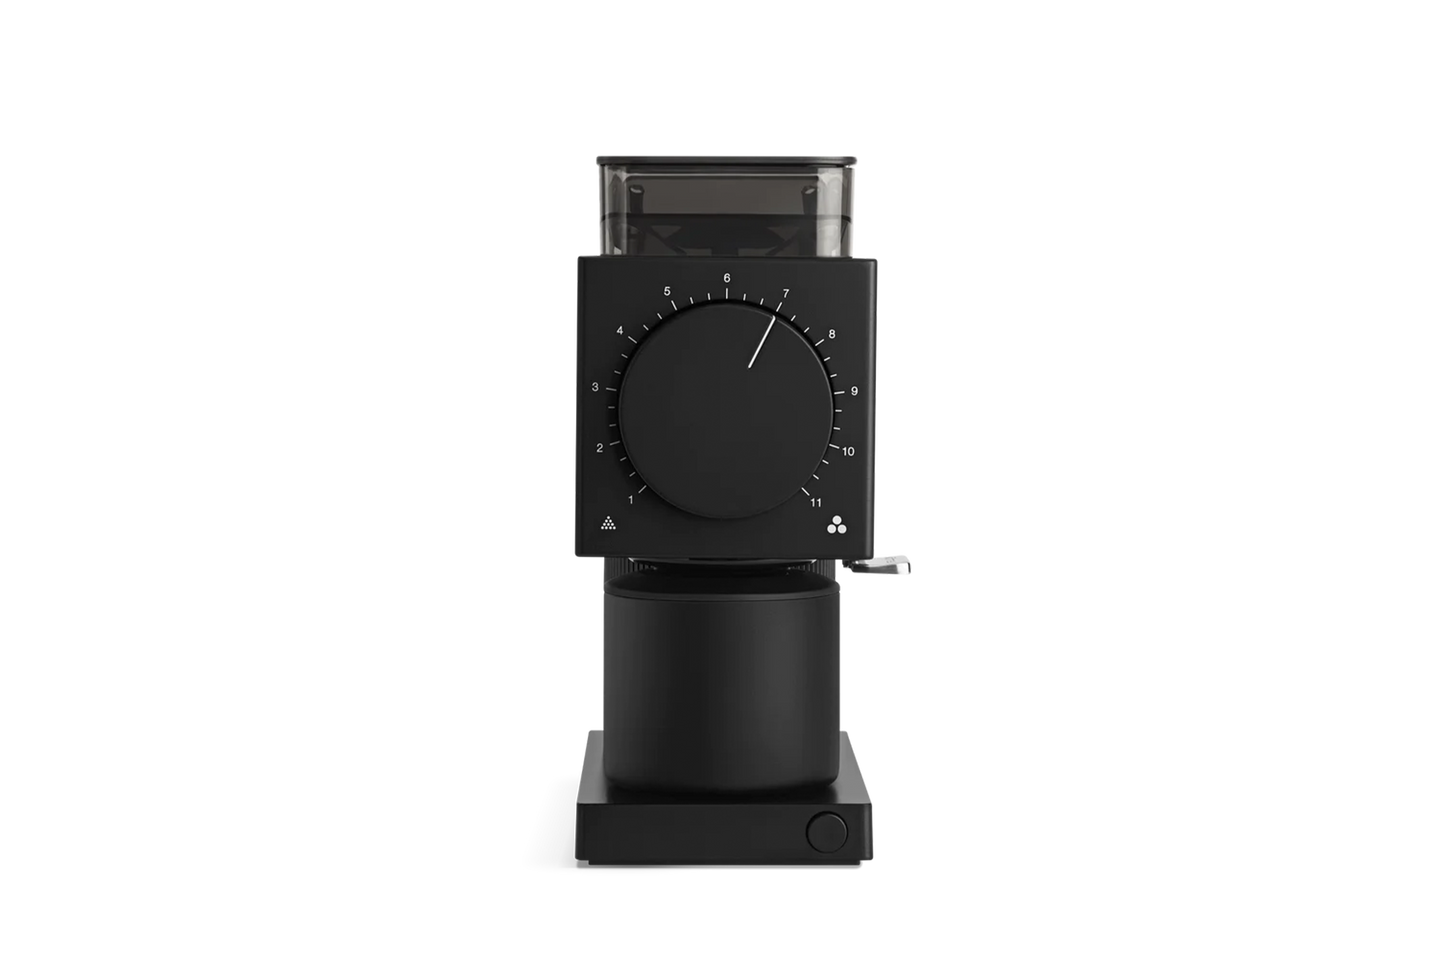 Designed specifically for filter brewing, the Ode grinder fuses professional functionality with design-driven form to offer a compelling grinder for coffee enthusiasts.